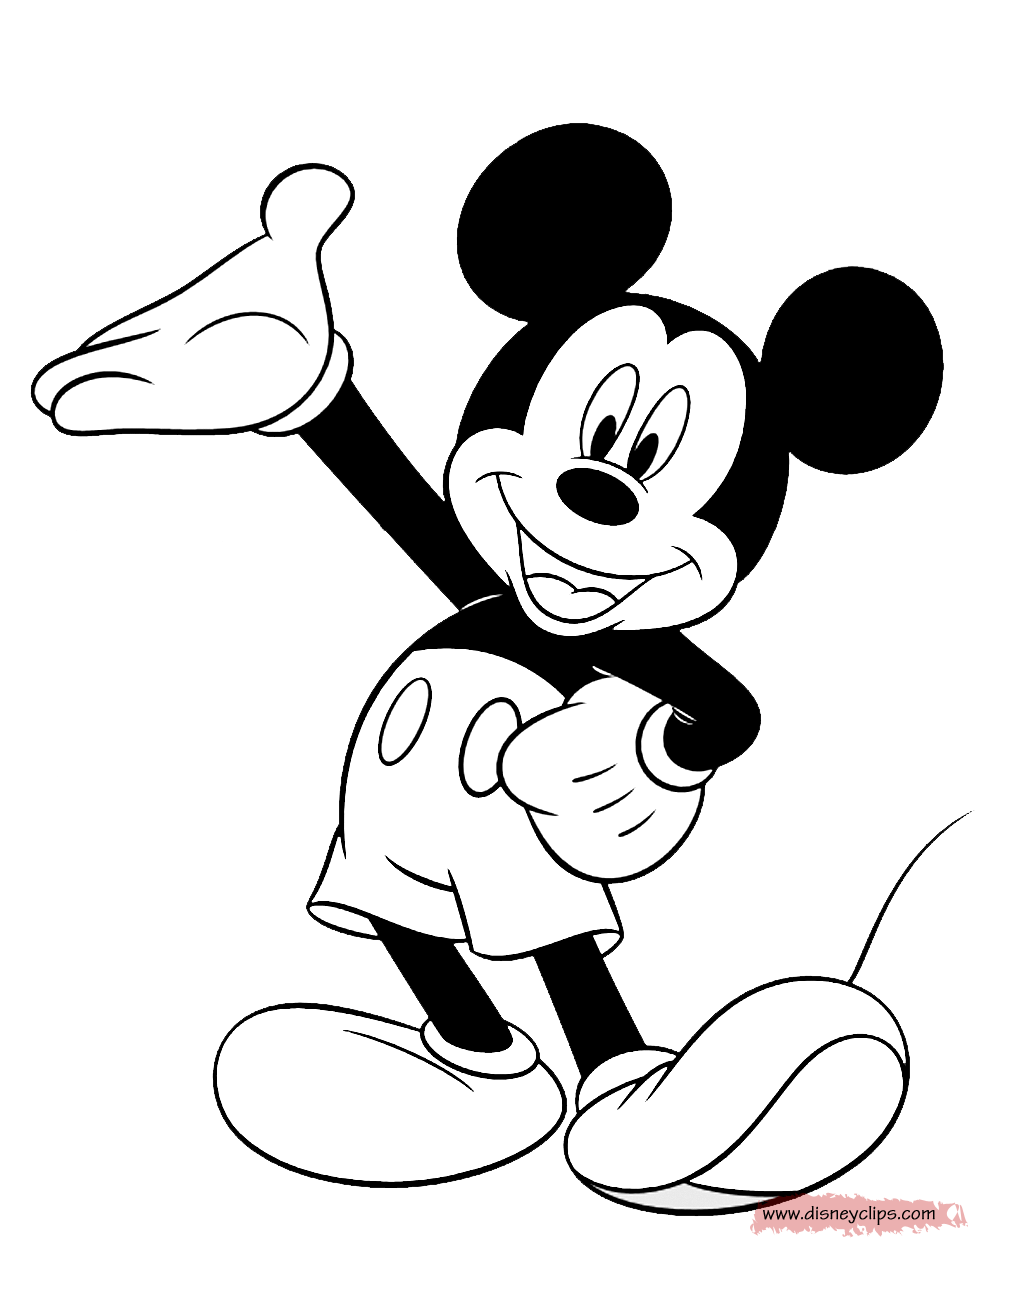 Mickey Mouse Coloring Pages 7 Disney's World of Wonders